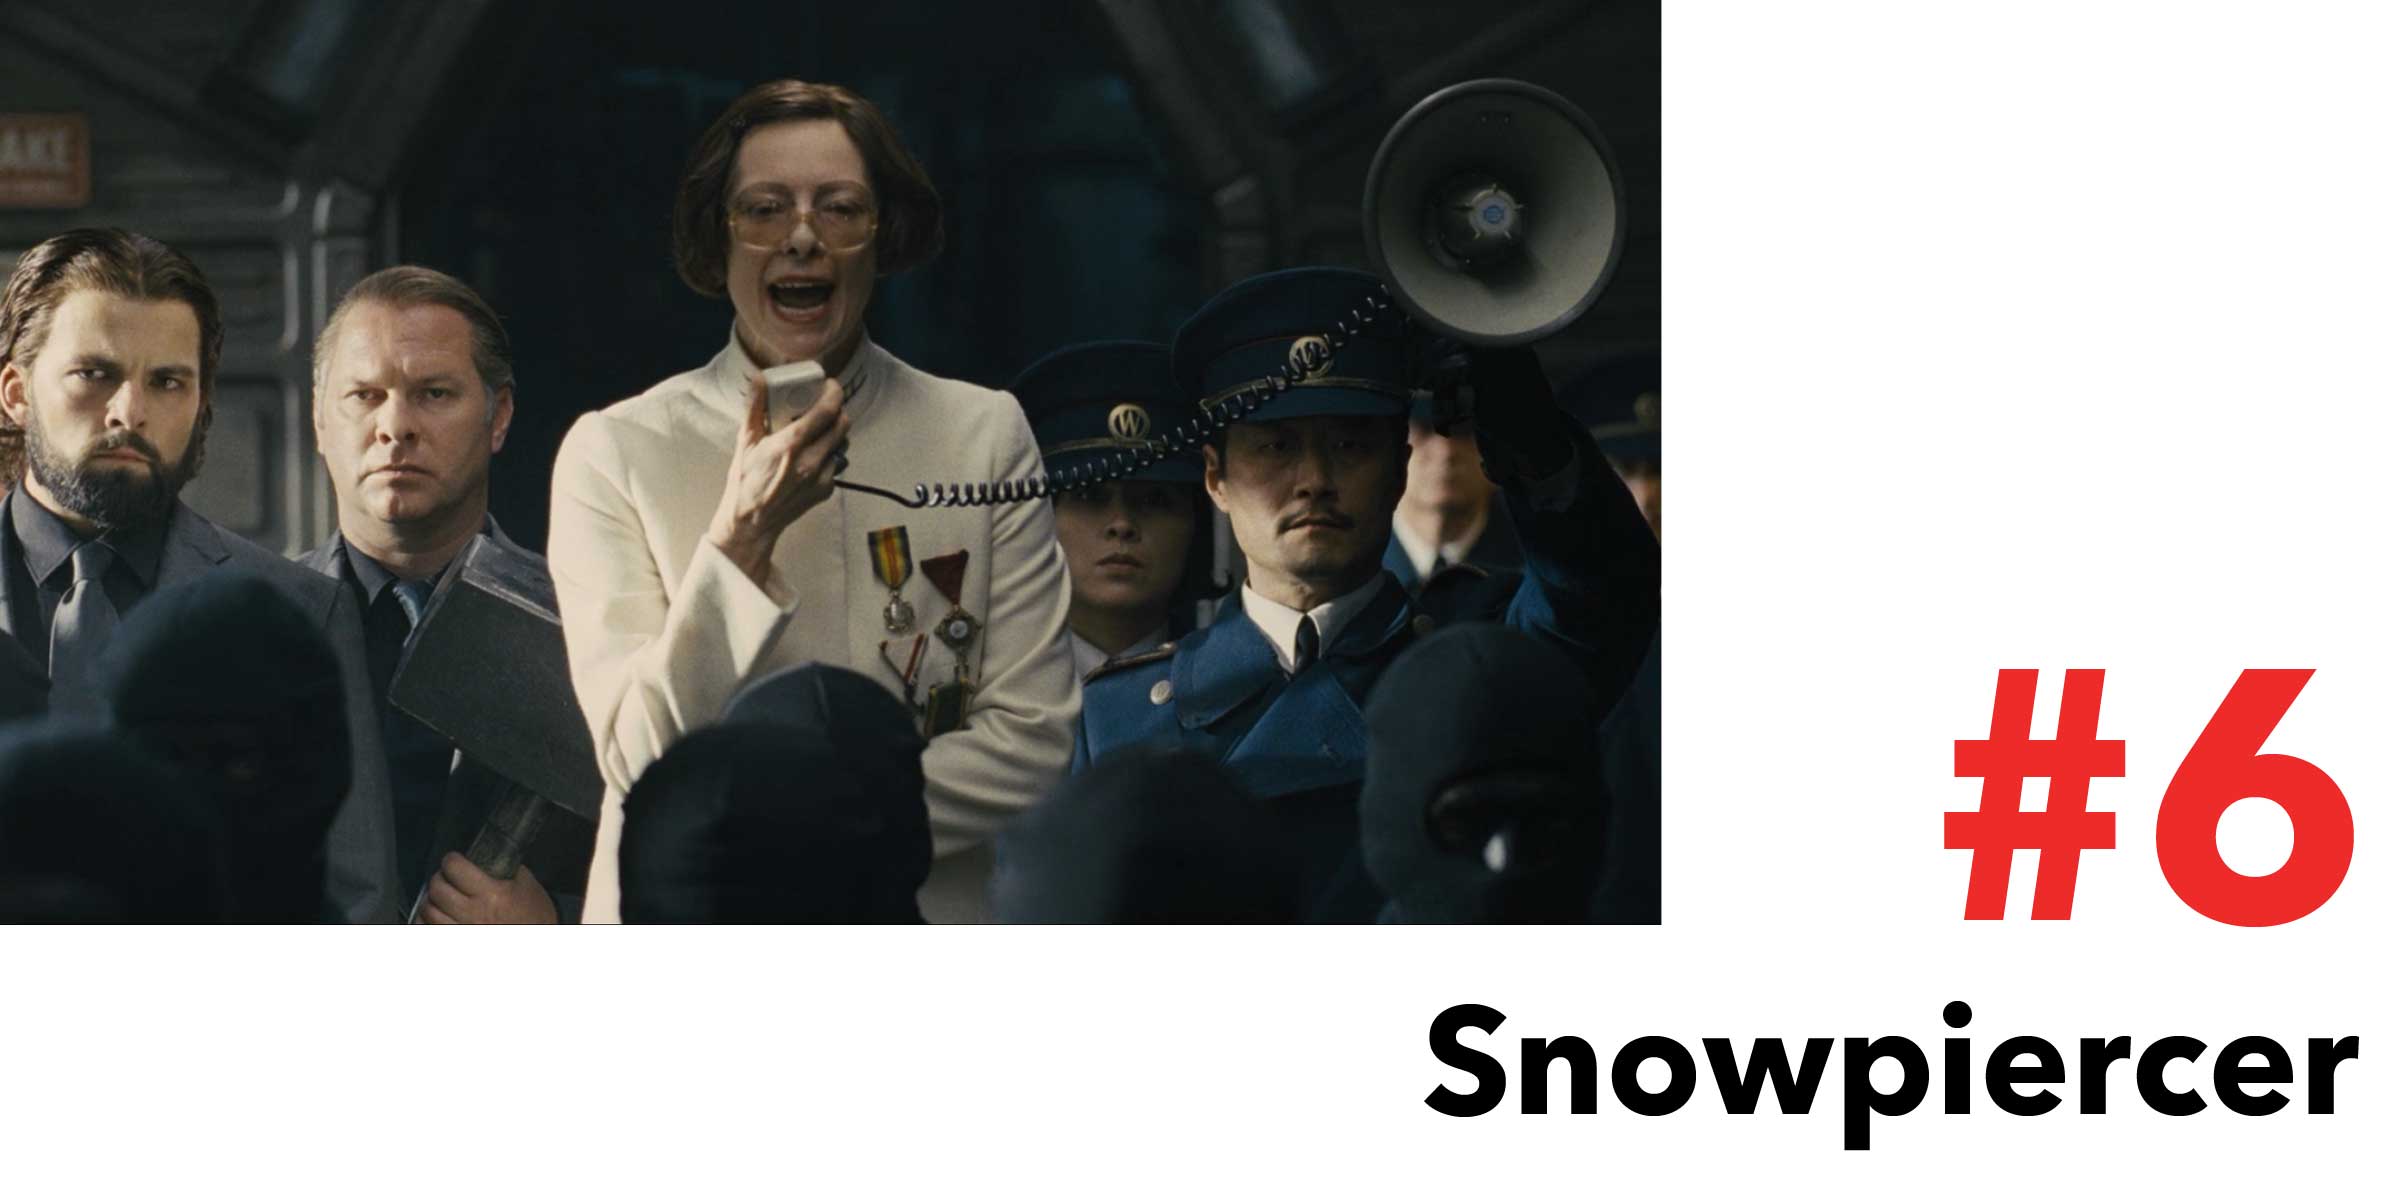 Snowpiercer is #6 in the Top 10 Post Apocalyptic Movies on Netflix. Pictured, a woman speaks through a megaphone surrounded by thugs.